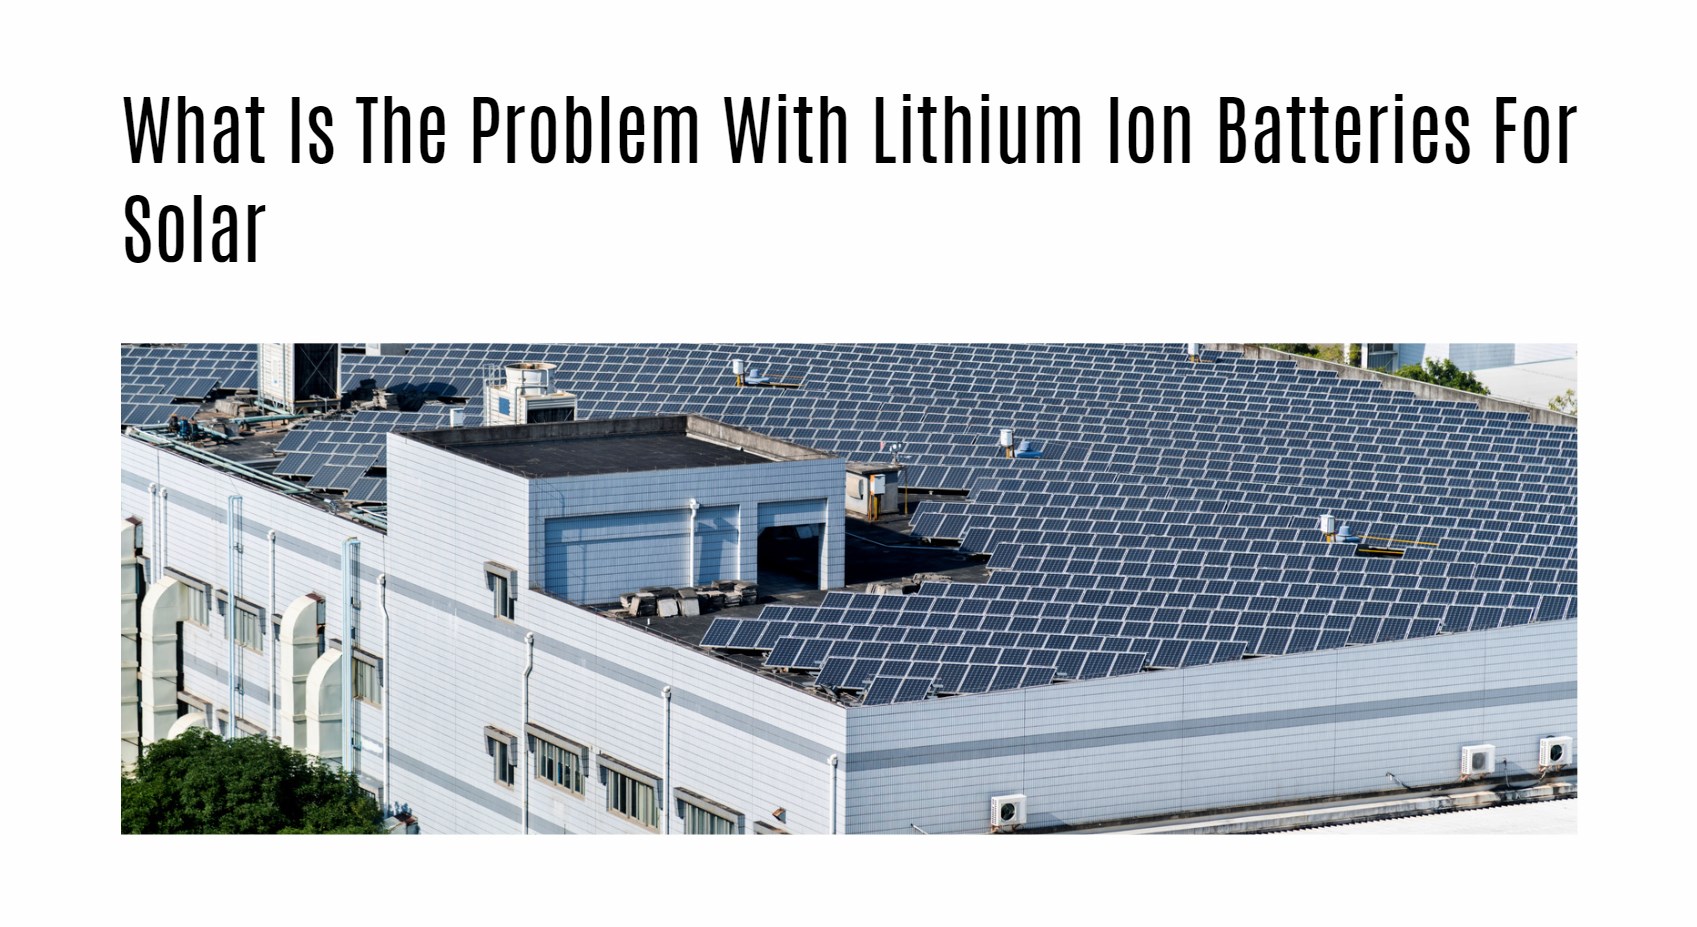 What Is The Problem With Lithium Ion Batteries For Solar